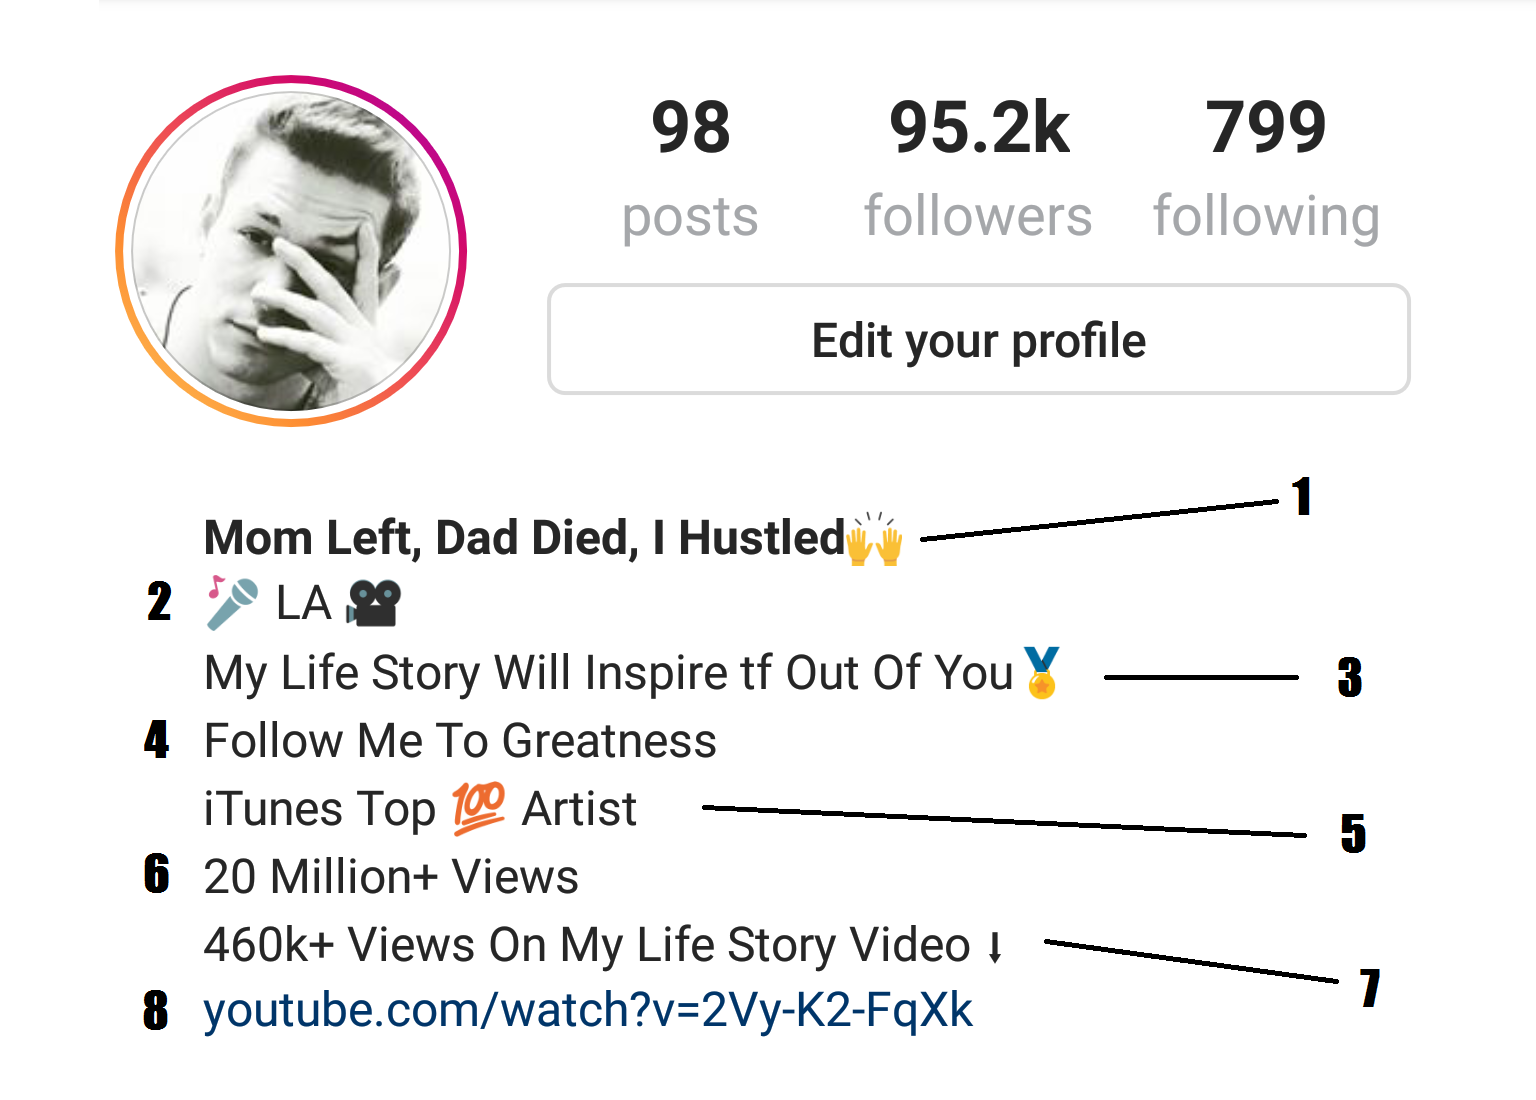 How To Make A Good Instagram Bio To Gain Followers Fast ... - 1536 x 1100 png 200kB